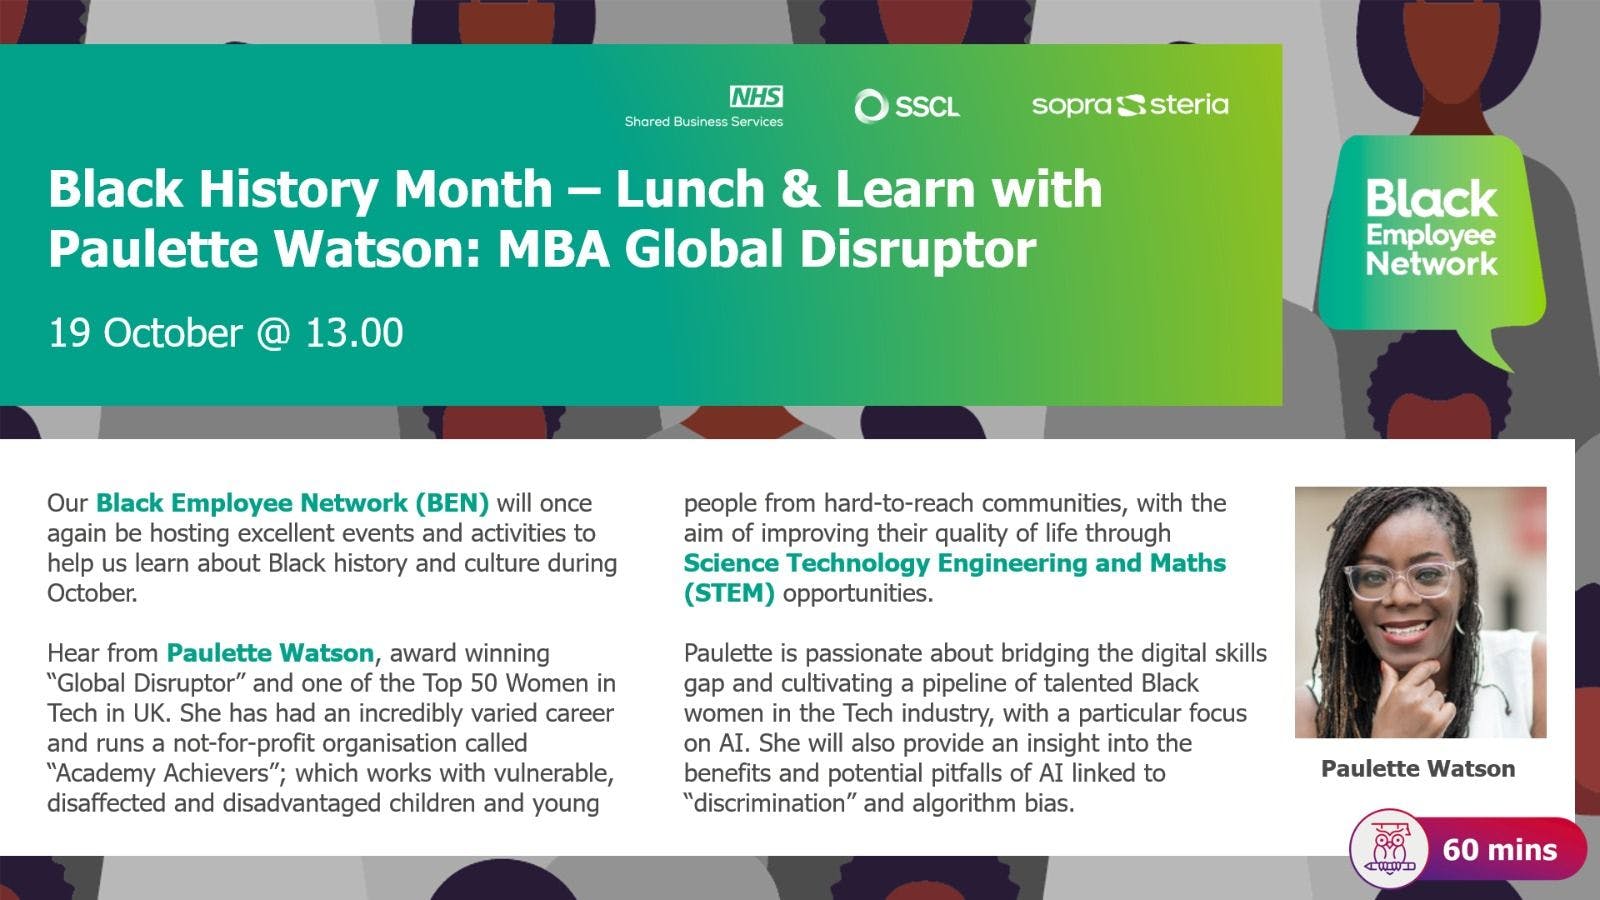 Black History Month - Lunch & Learn with Paulette Watson: MBA Global Disruptor